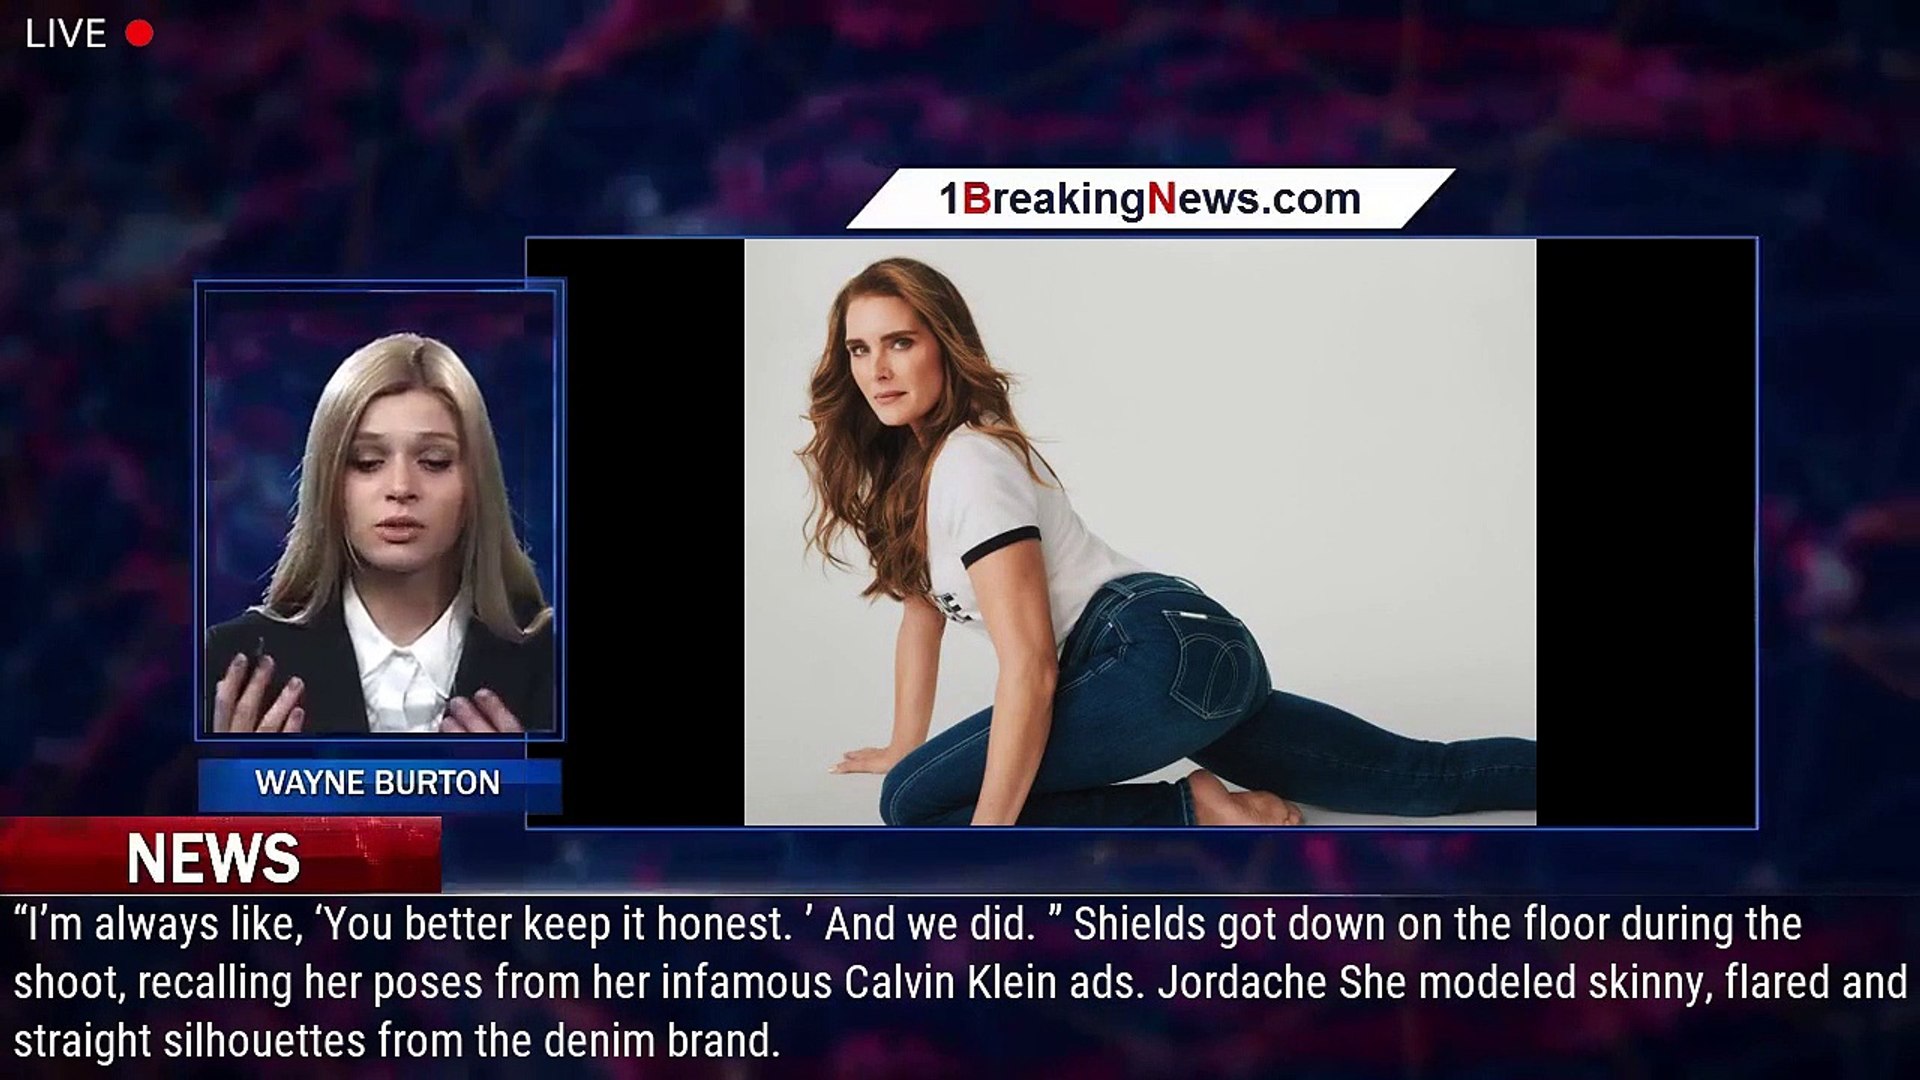 Brooke Shields Poses In Jordache Jeans 40 Years After Calvin Klein